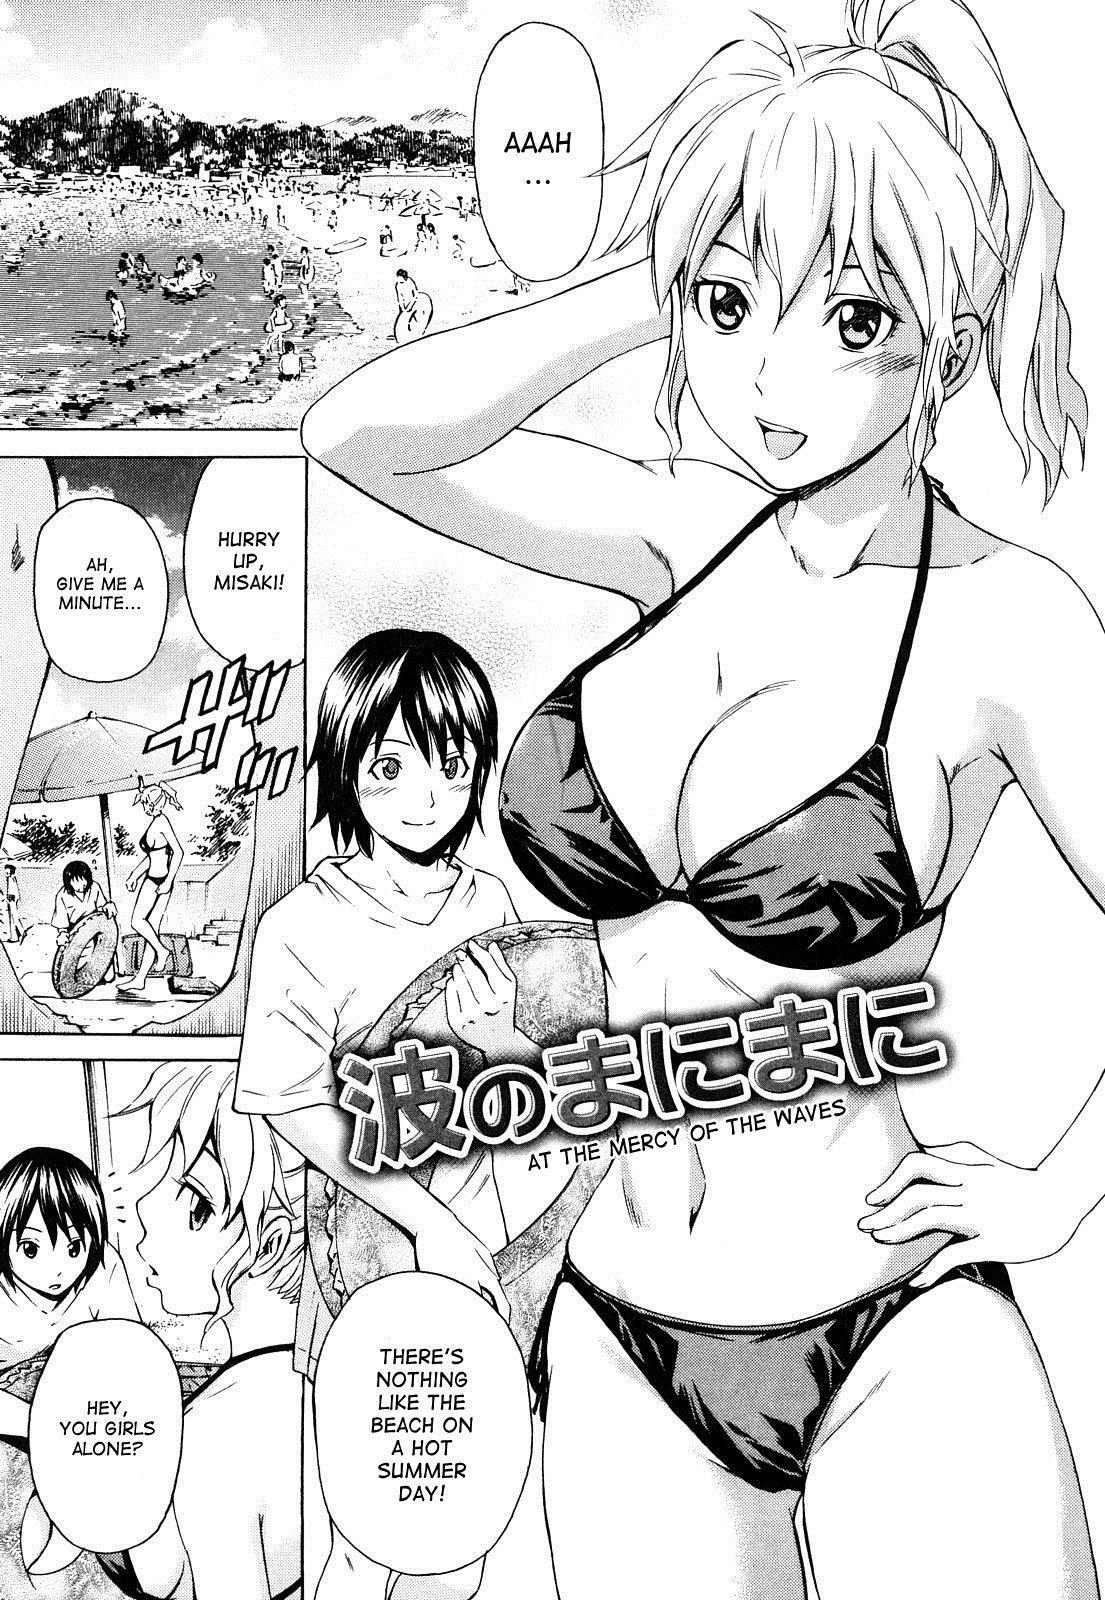 Mitsudaku Kanojo Vol.1 Chapter 6: At The Mercy Of The Waves - Picture 1